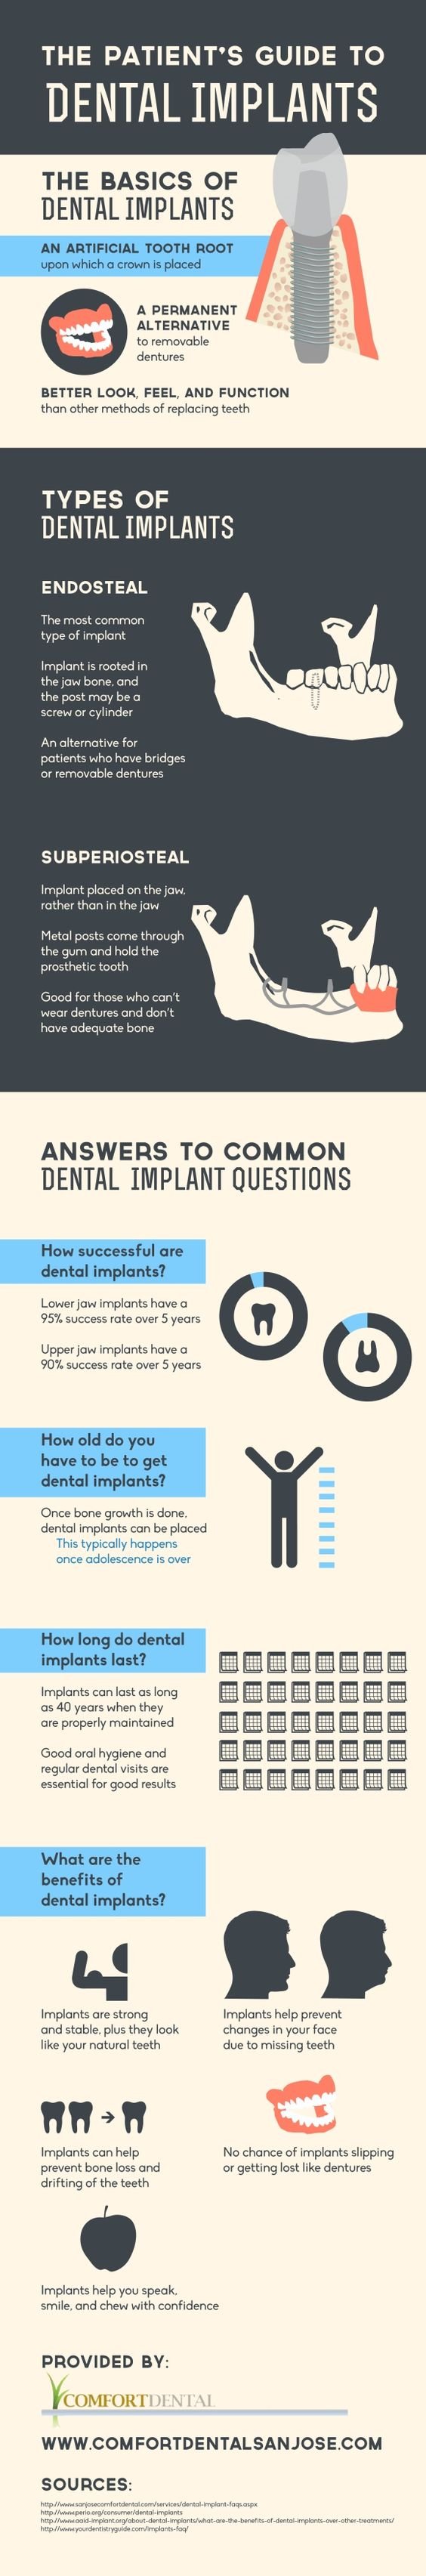 patients guide to dental implants